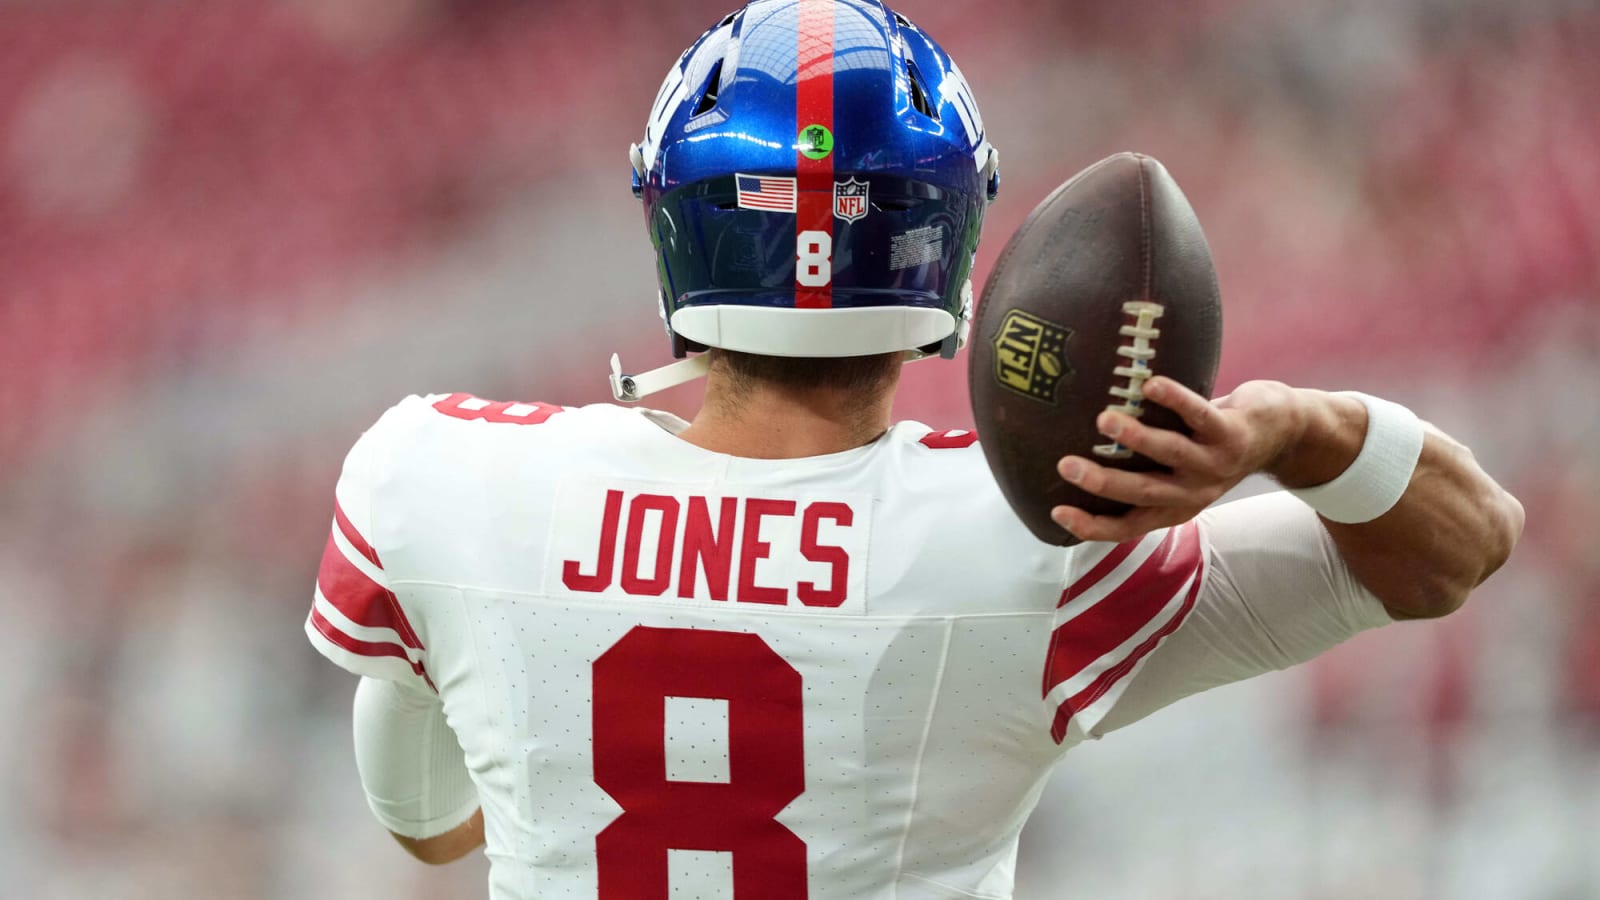 NFL player props for NY Giants vs. Raiders to wager in Week 9 NFL